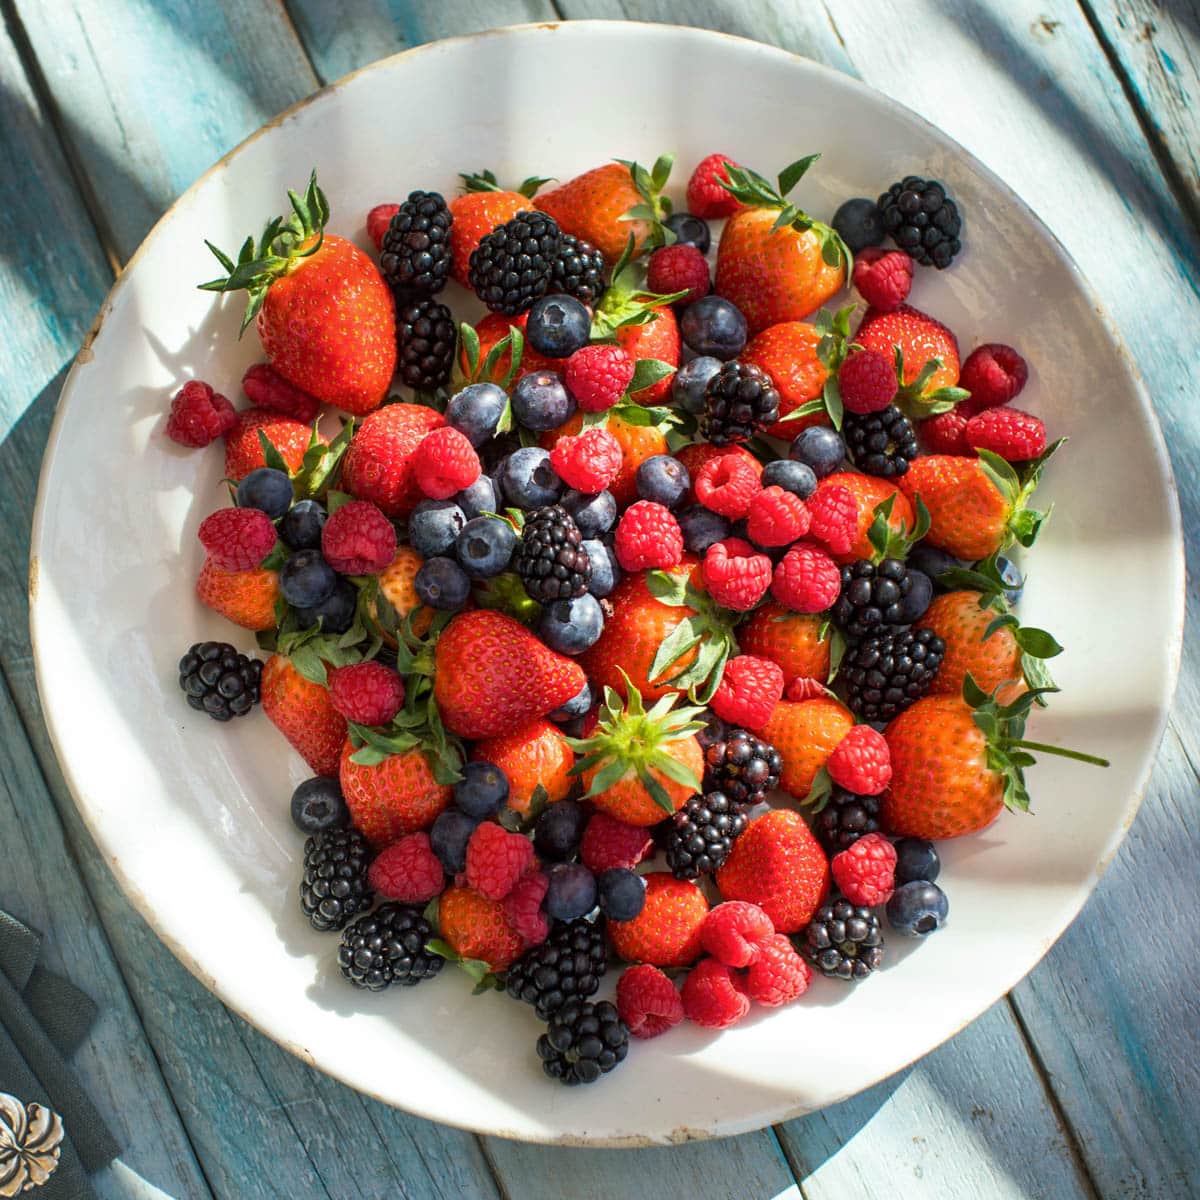 An overview of a plate full of mixed berries on a picnic table